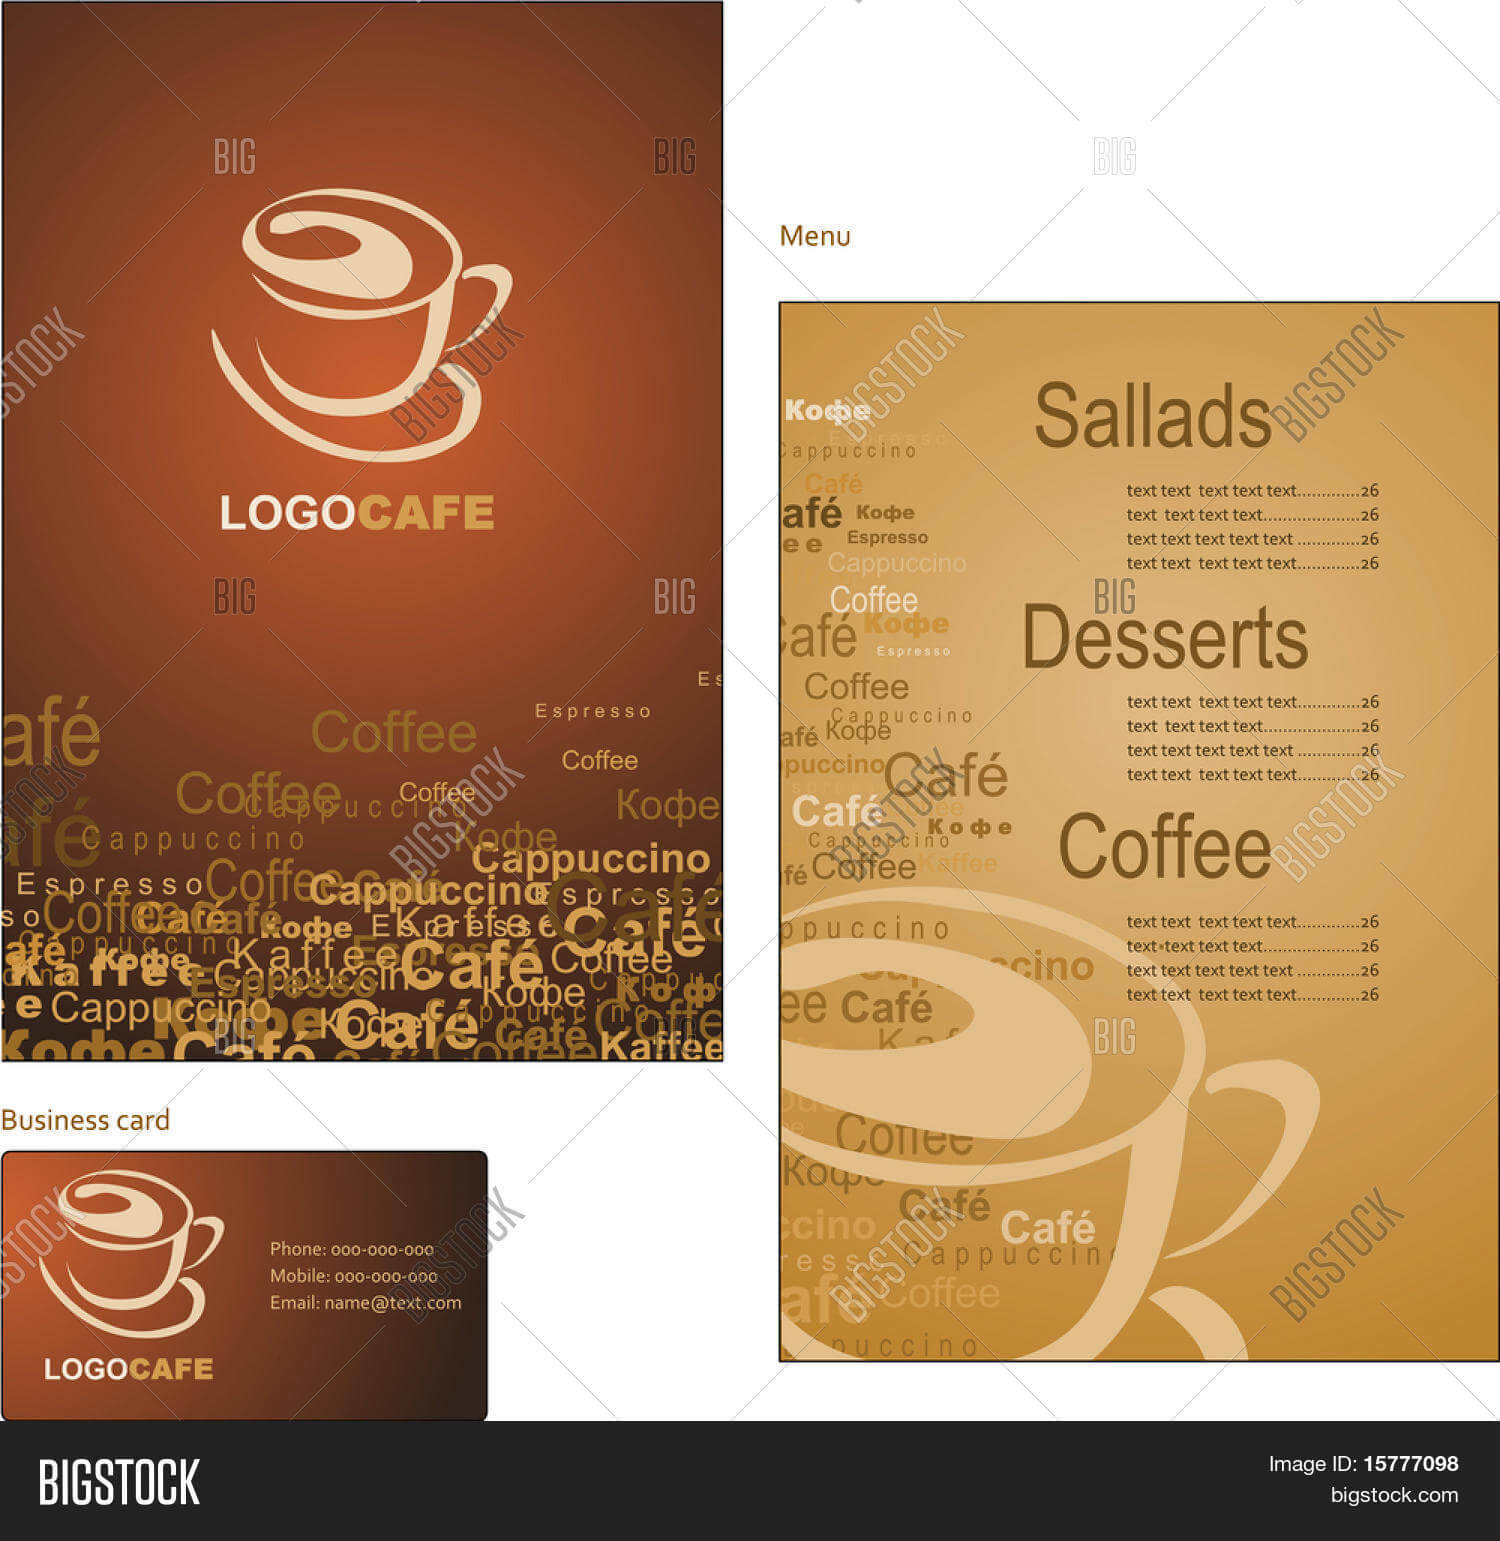 Template Designs Menu Vector & Photo (Free Trial) | Bigstock With Regard To Coffee Business Card Template Free